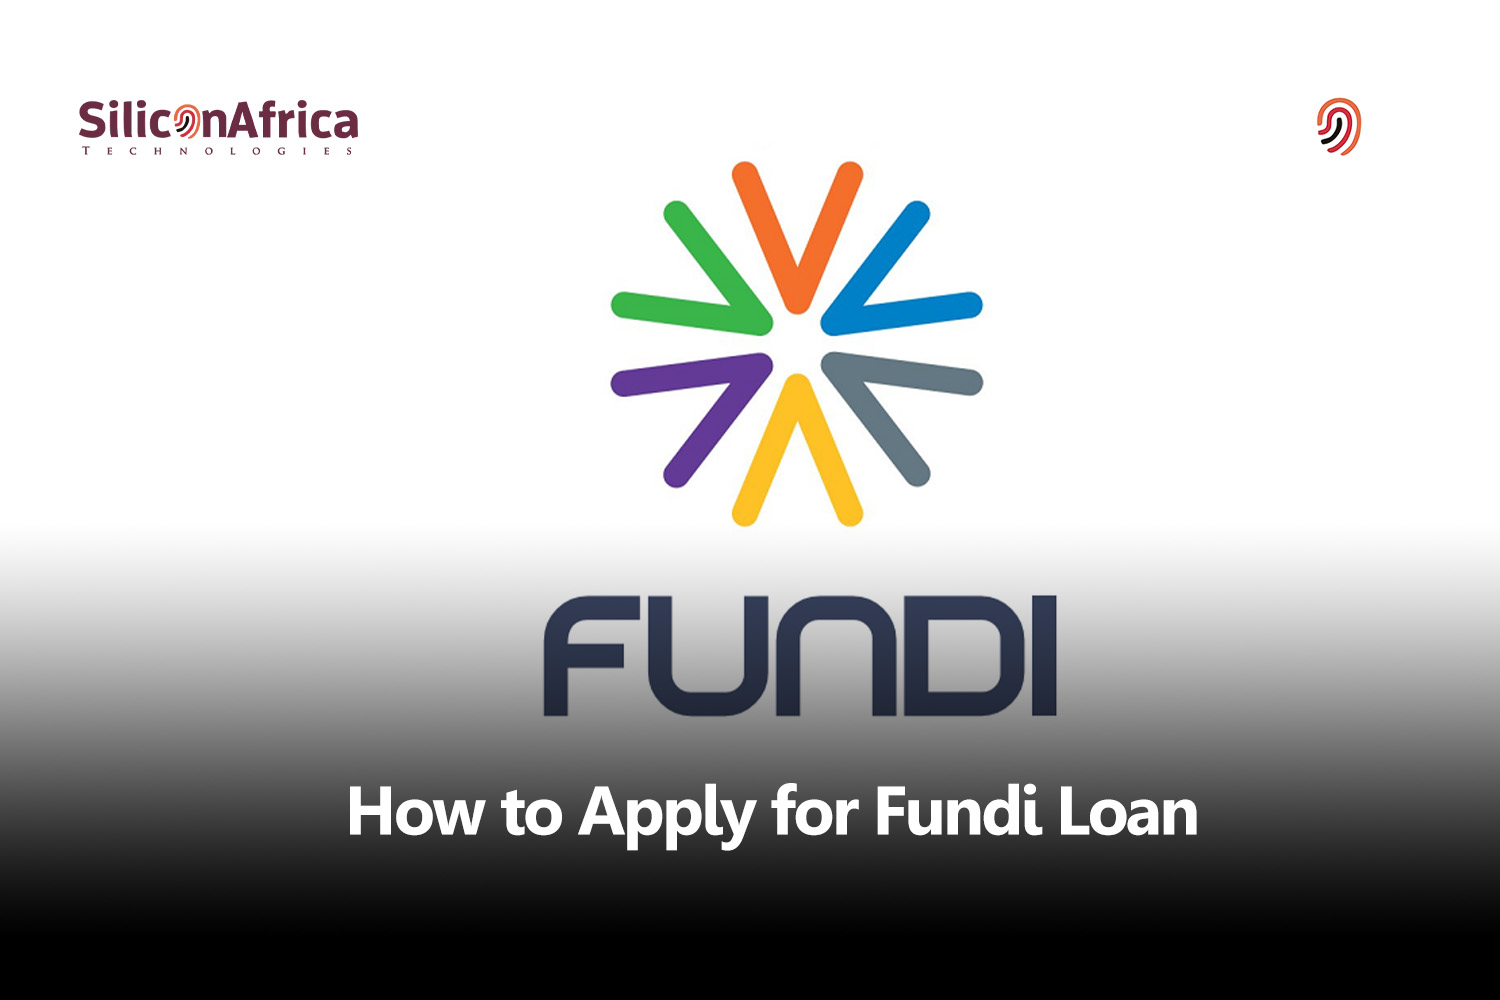 How to Apply For a Fundi Loan